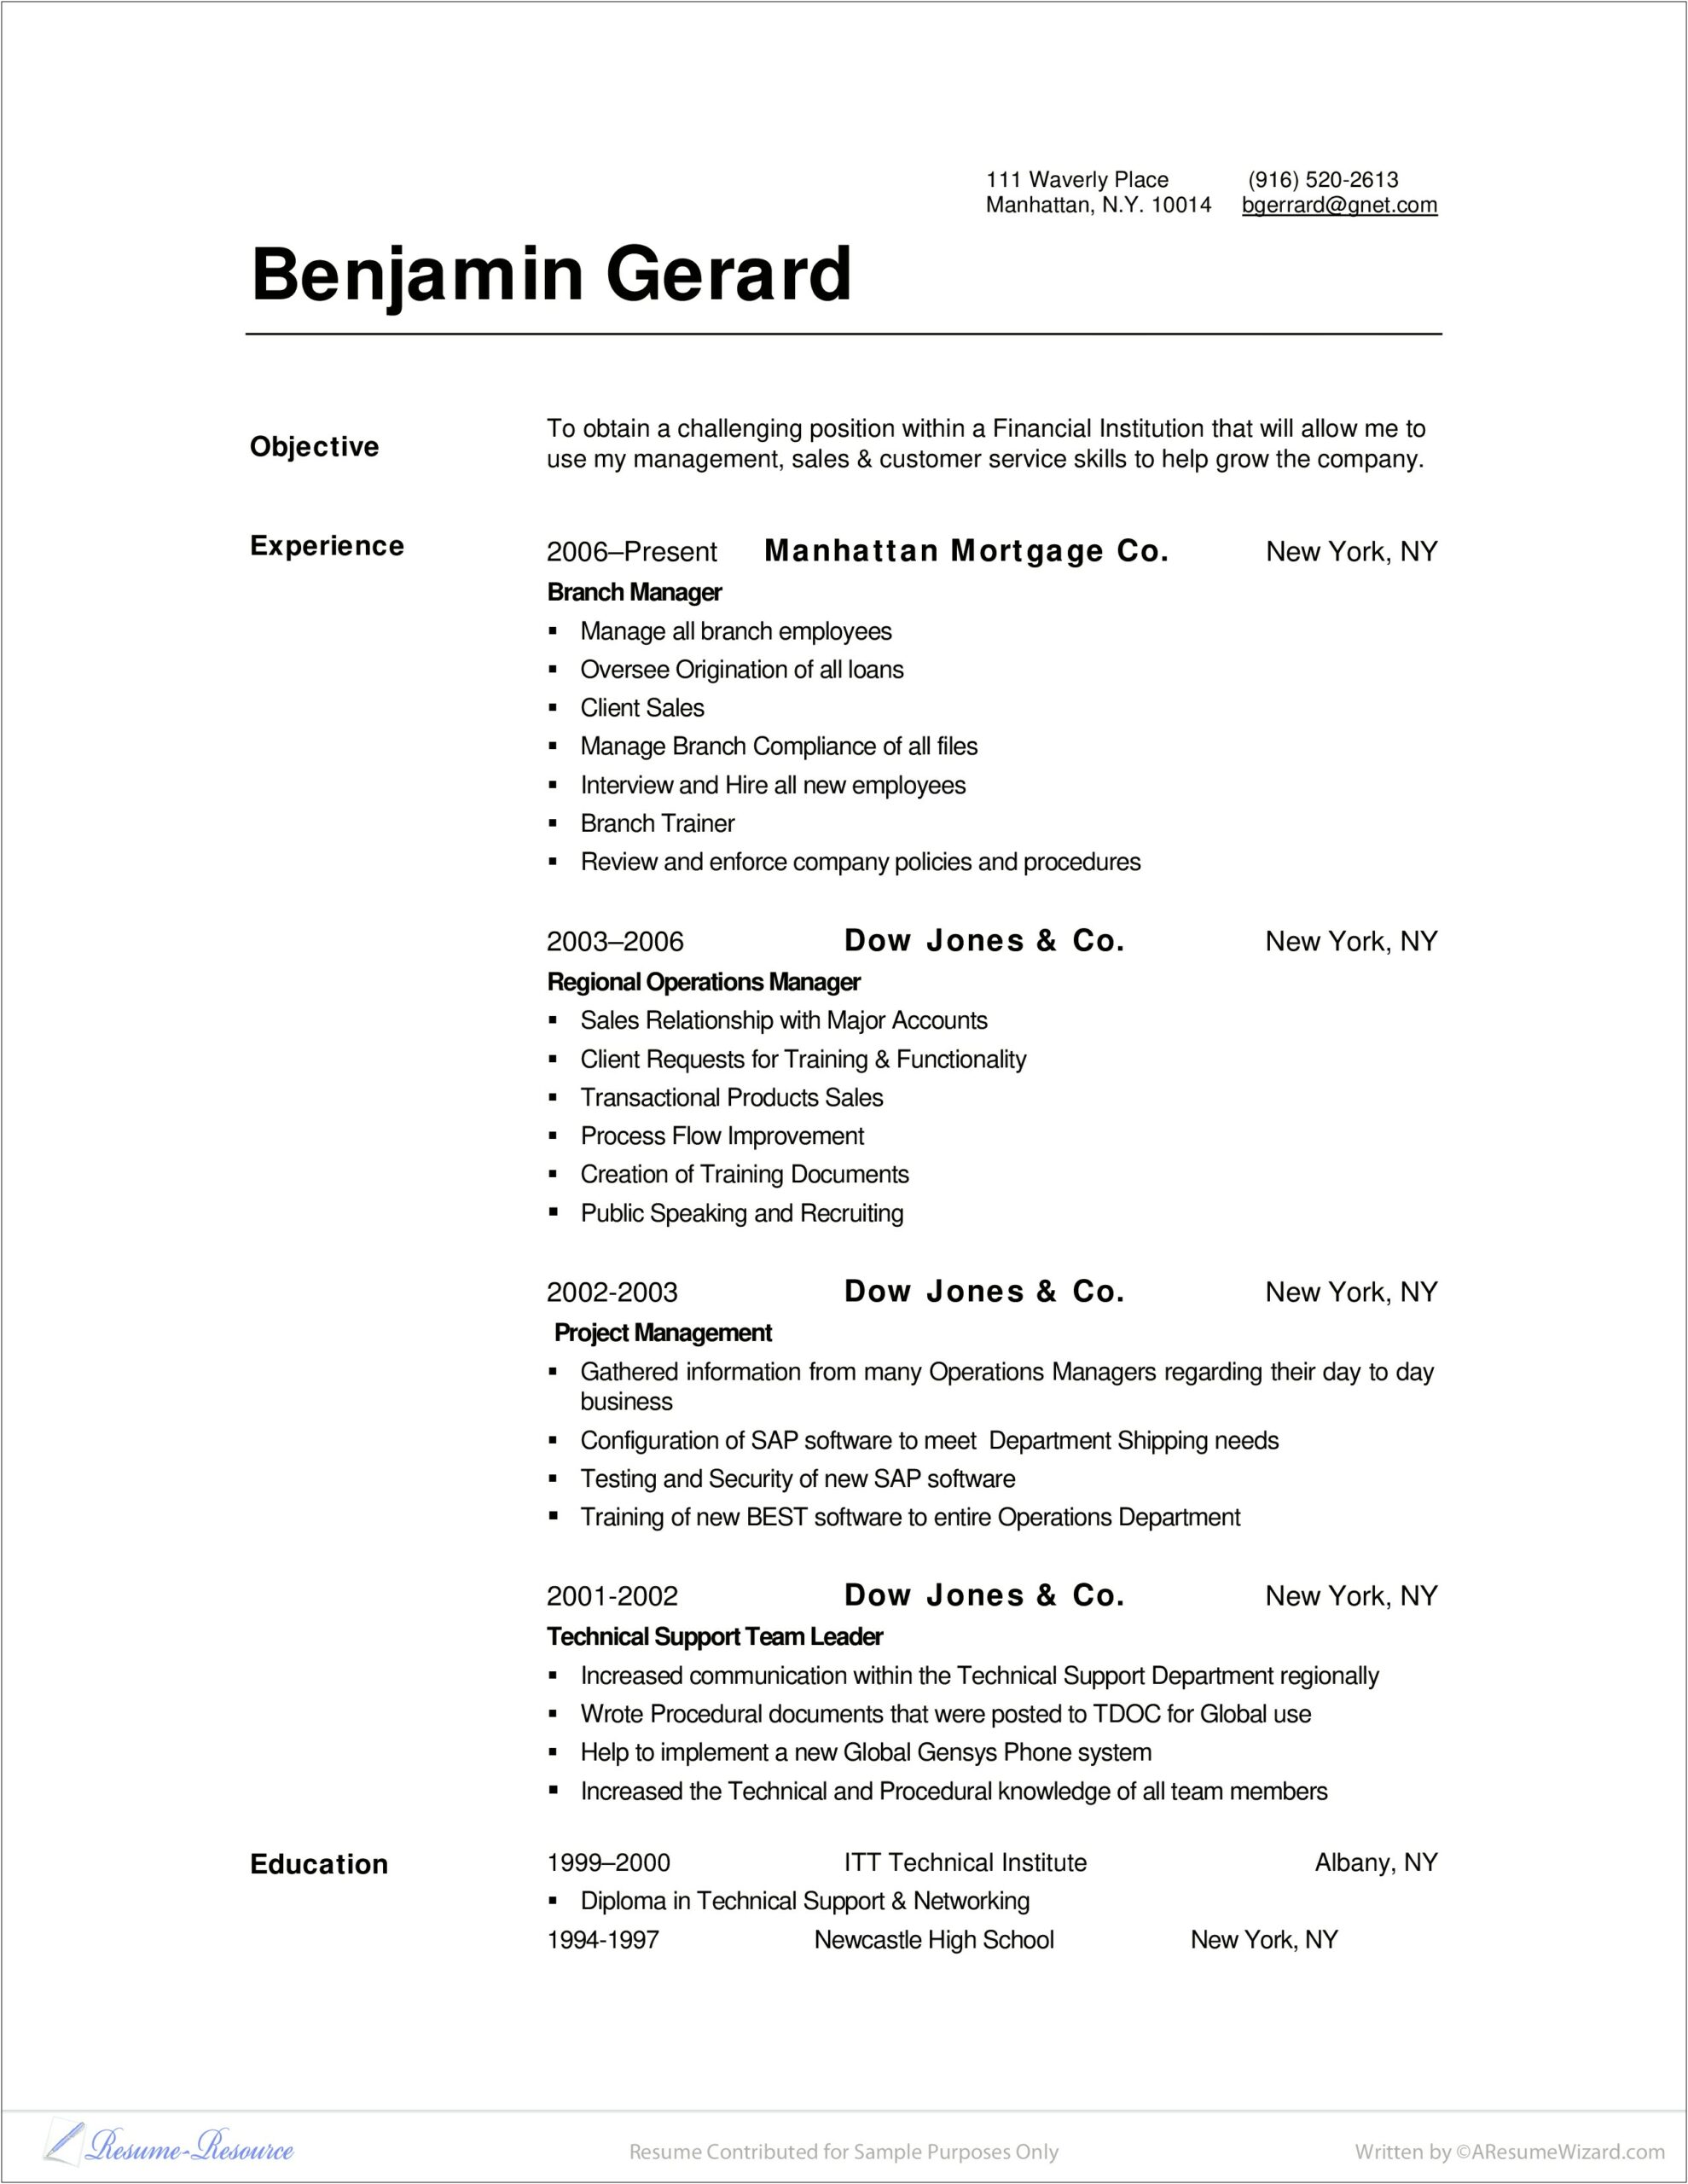 Resume Format For Experienced Bank Managers